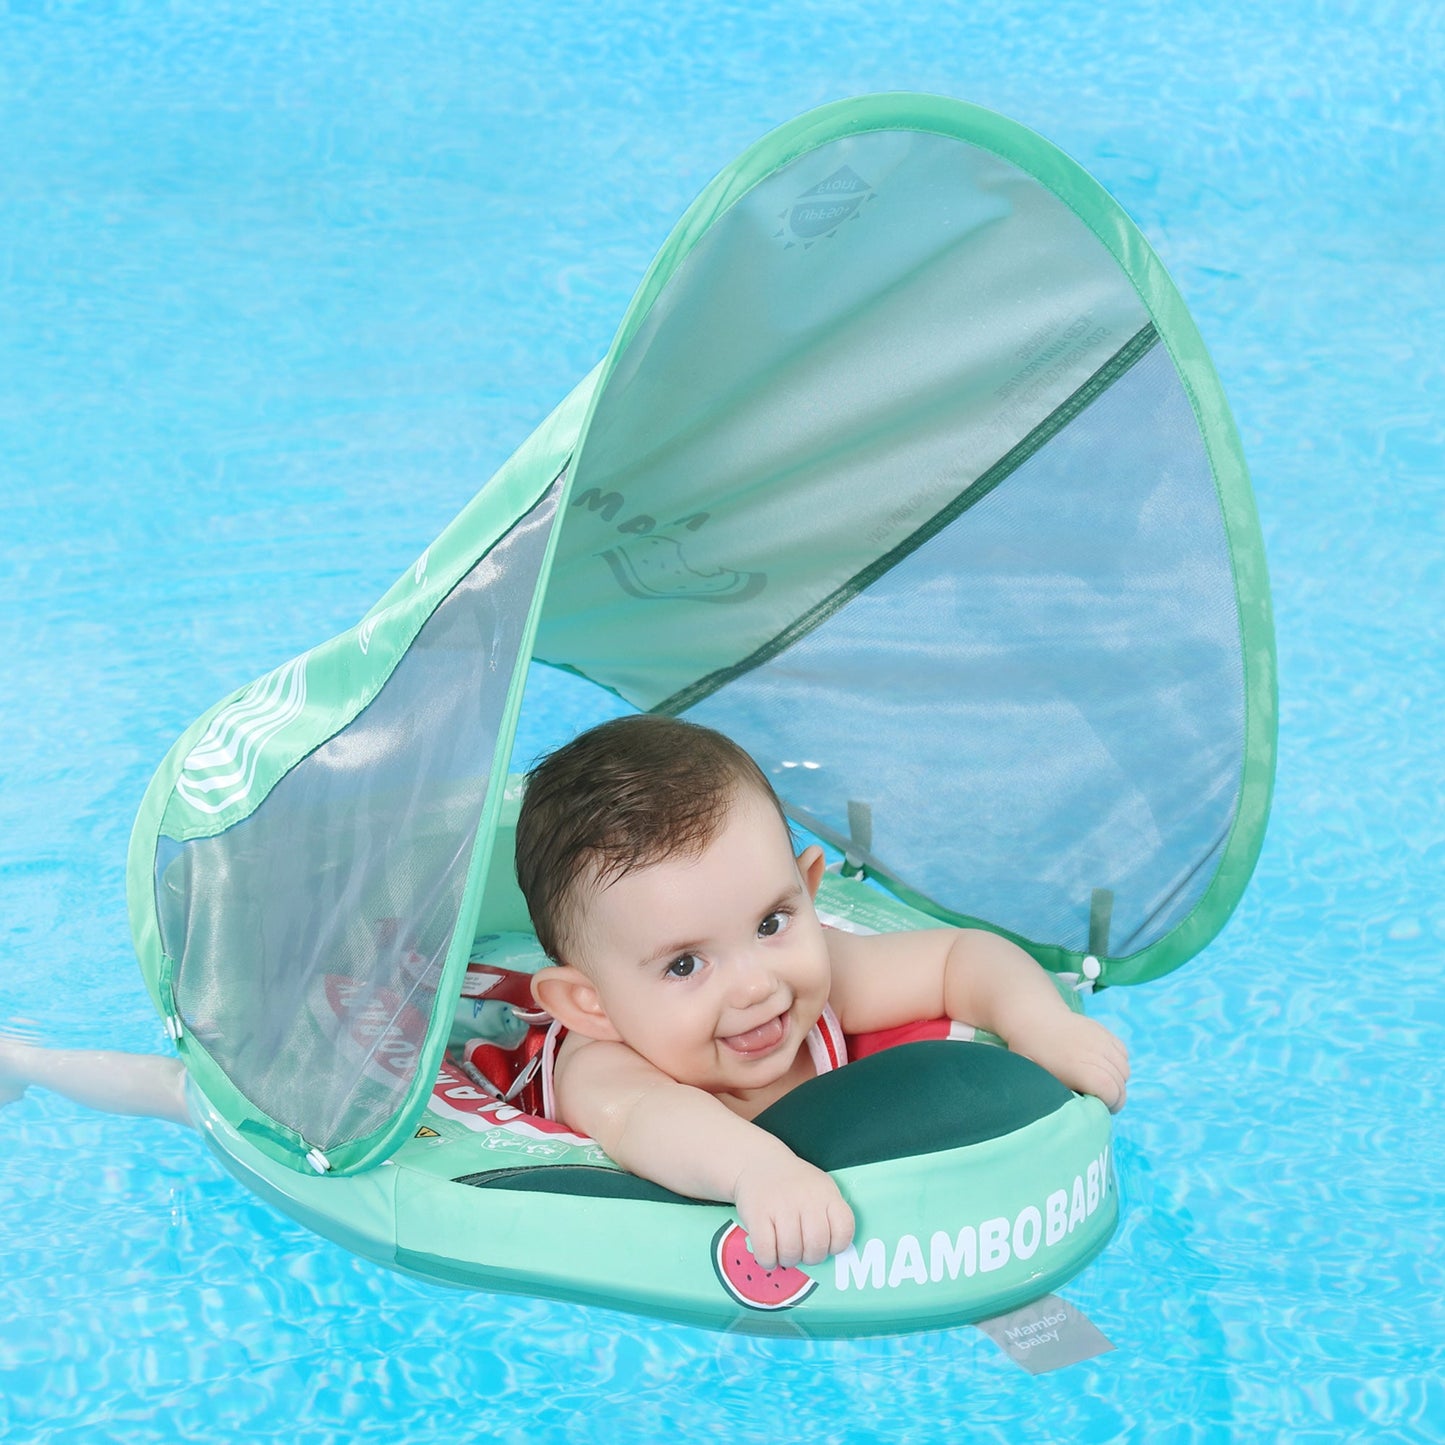 Mambobaby Swim Float Classic Edition with Canopy